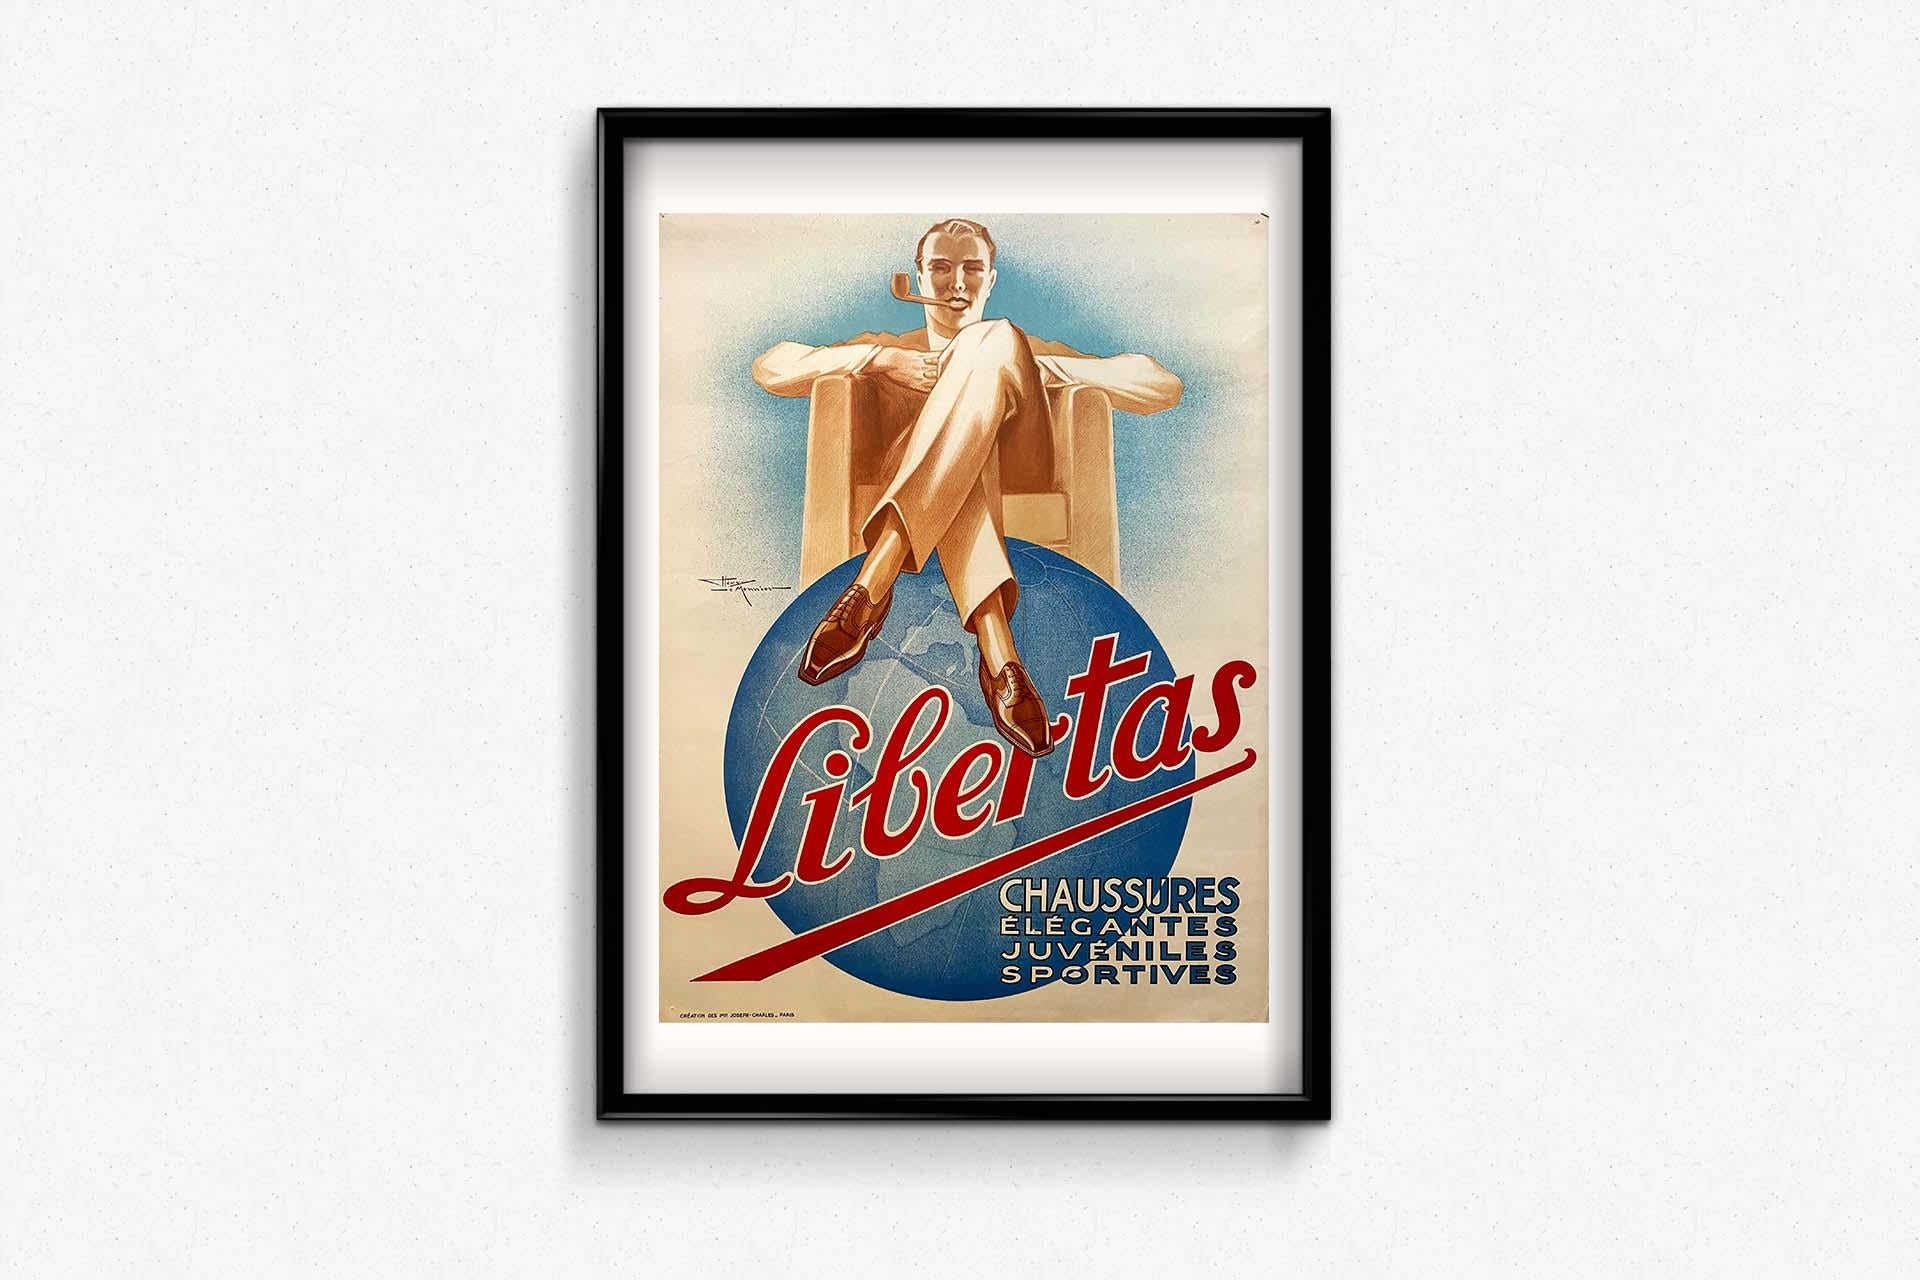 Beautiful Art Deco style advertising poster by Henry Lemonnier for Libertas shoes.
Born in Paris on March 7, 1893, Henry Le Monnier attended the Arts Décorarifs in Paris, before starting to publish in 1920 in Fantasia. In 1923, he became a poster